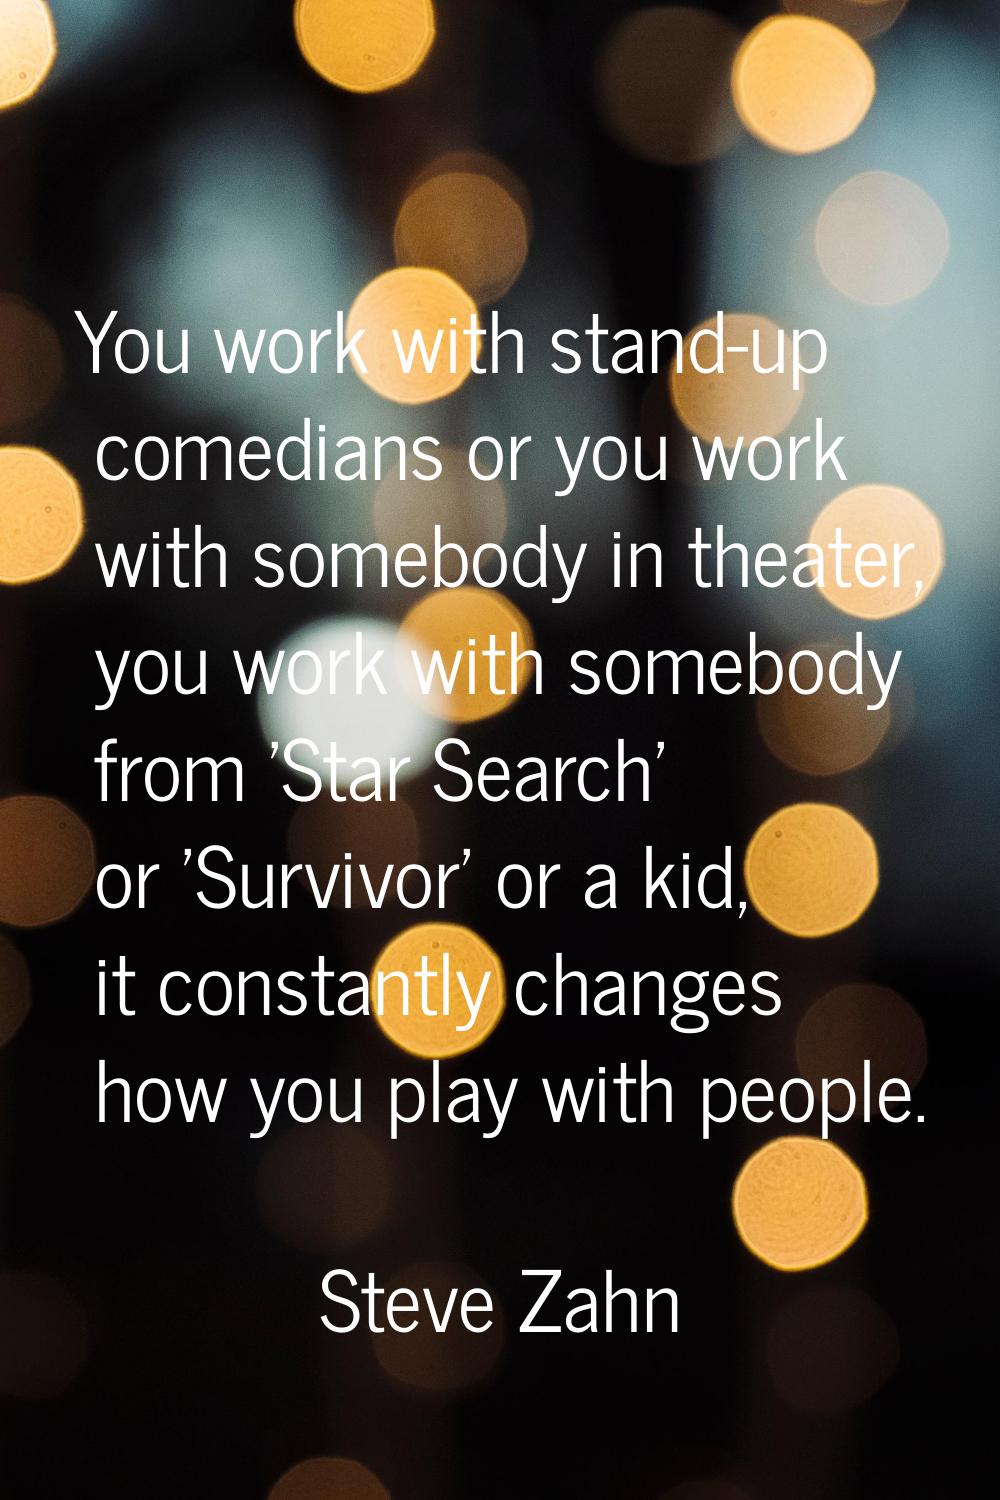 You work with stand-up comedians or you work with somebody in theater, you work with somebody from 